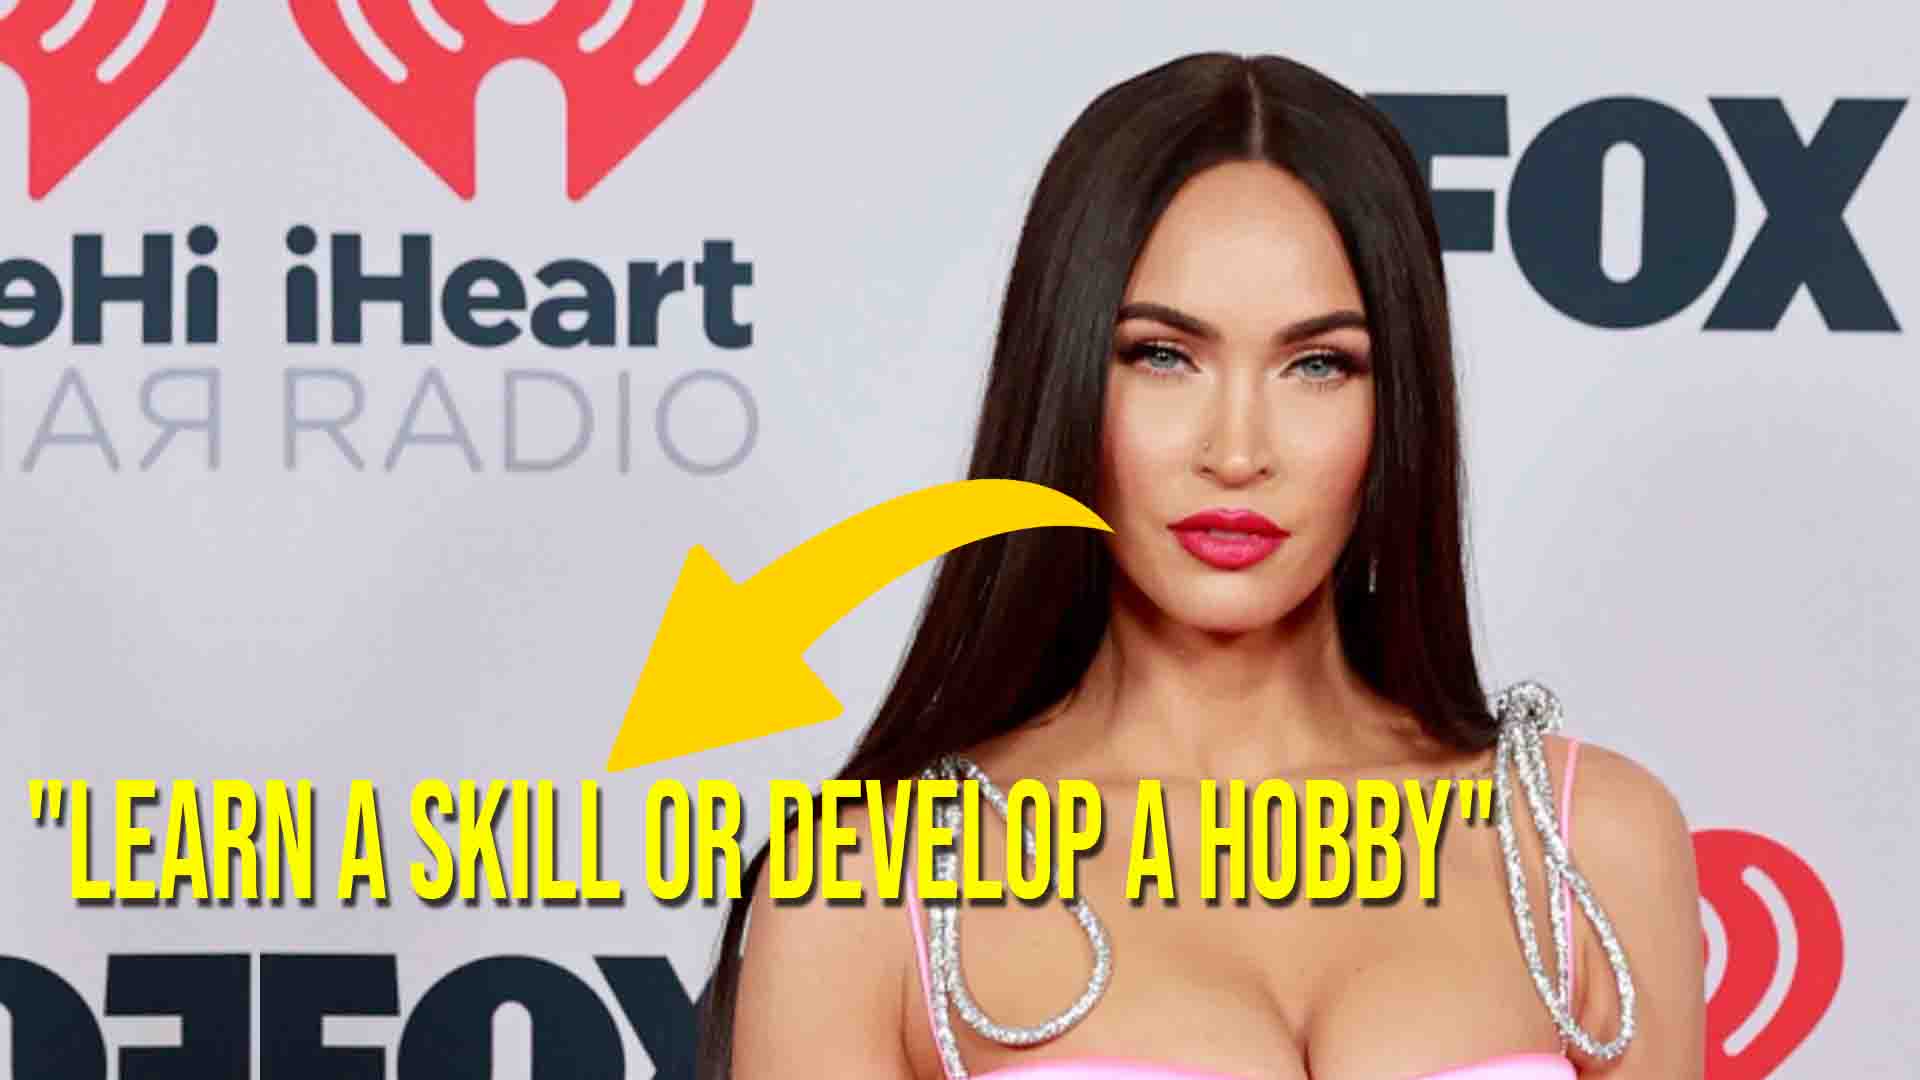 “Just Learn a Skill Or Develop a Hobby” Says Megan Fox